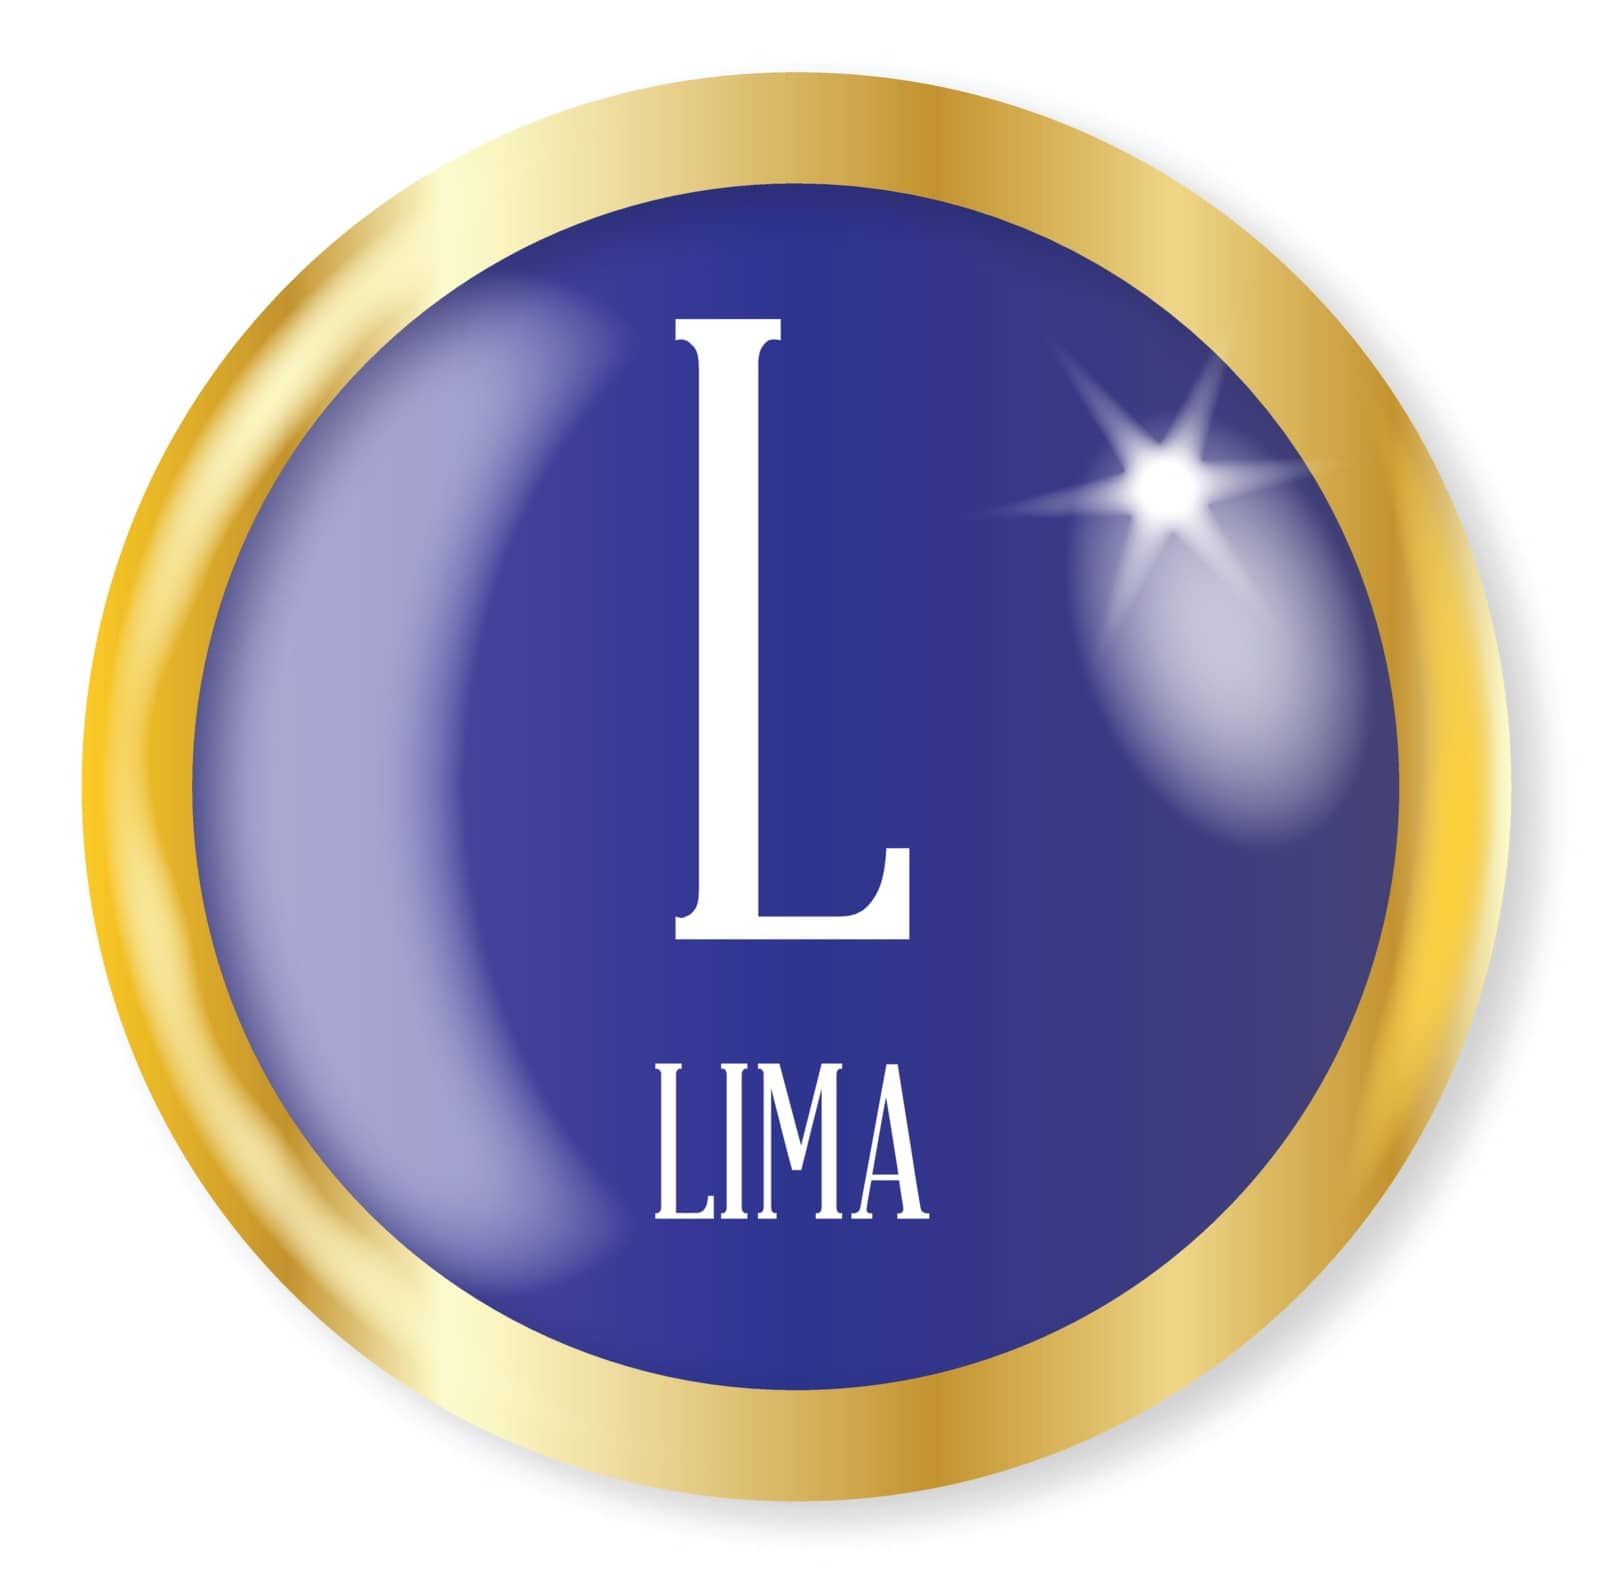 L for Lima button from the NATO phonetic alphabet with a gold metal circular border over a white background